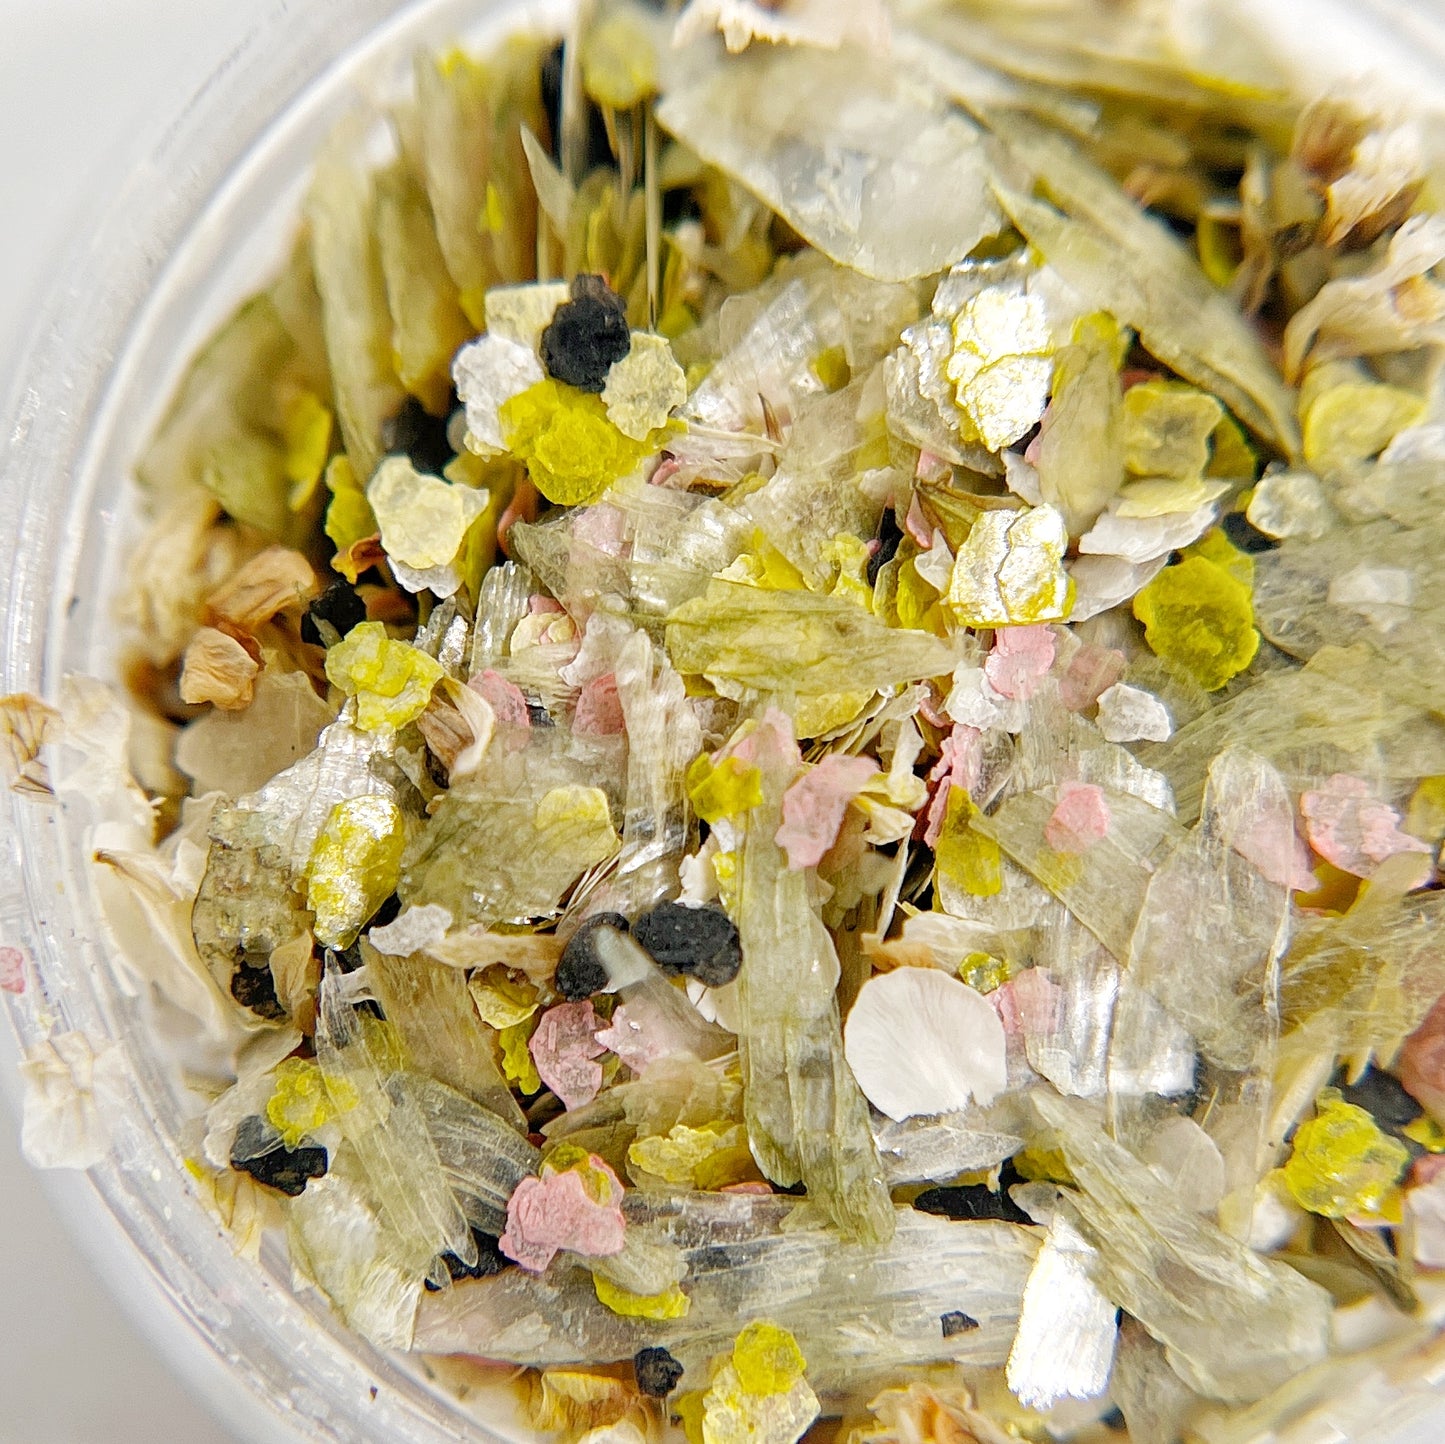 Confetti Crush Collection in Lily Crush - Colorful Mix of Mica Speckles and Dried Flower Petals in Jar, Featuring Pale Green, White, Pink, and Black Colors on White Background. 